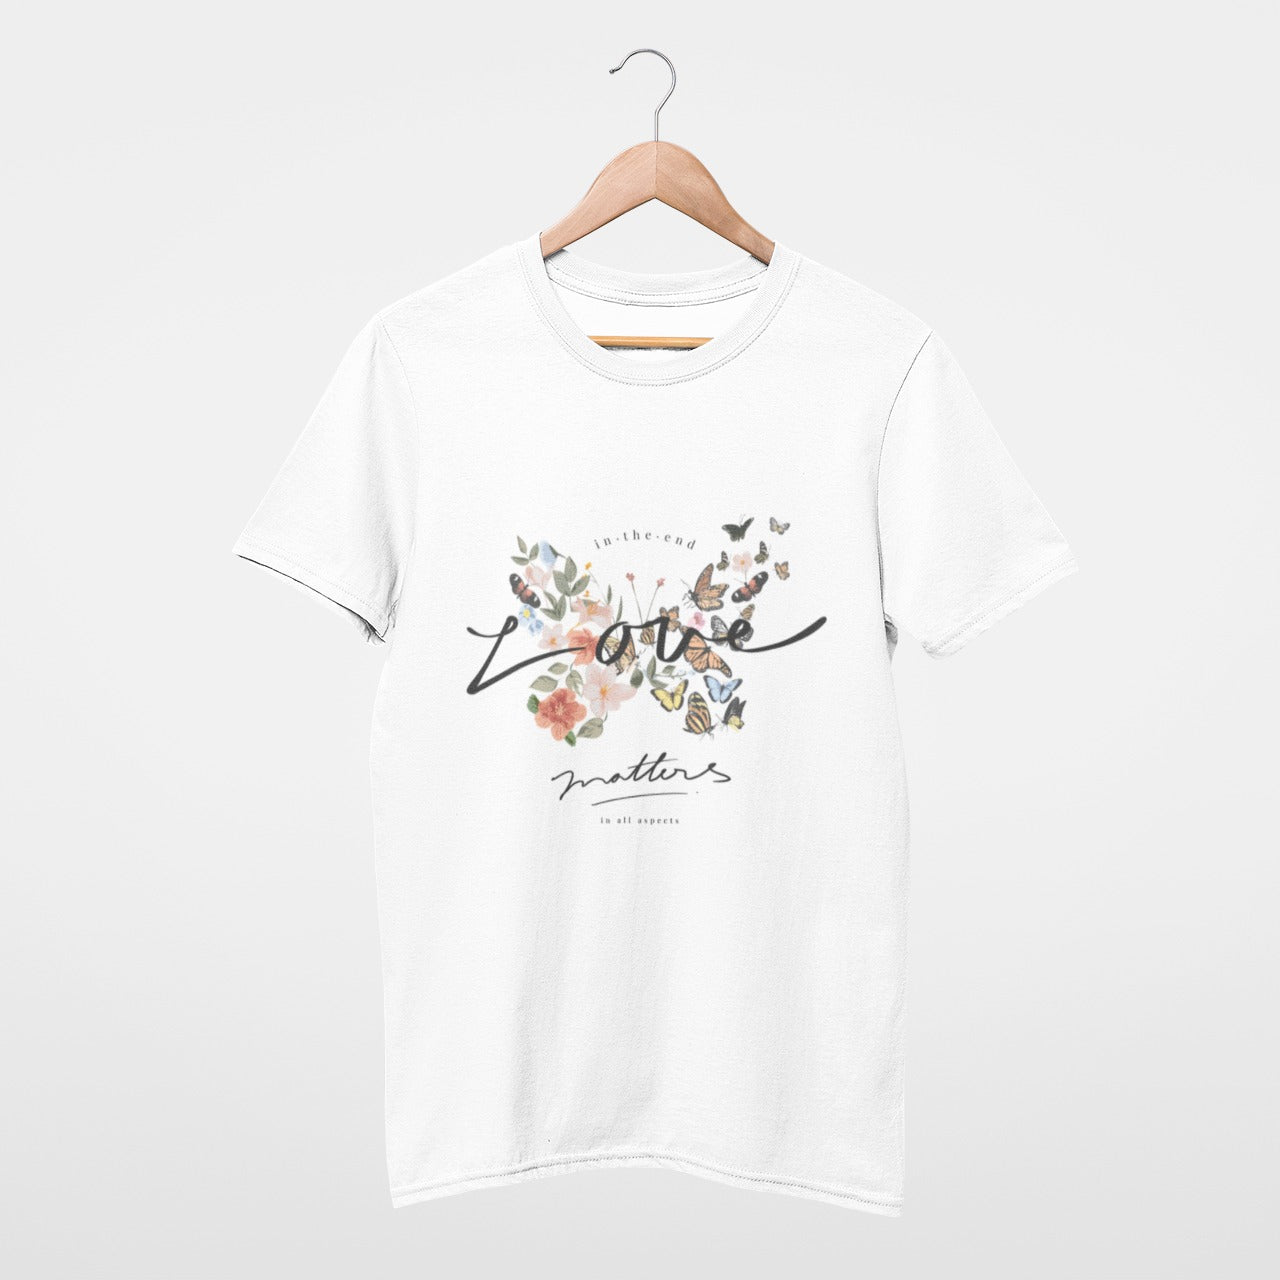 In the end love matters in all aspects Tee